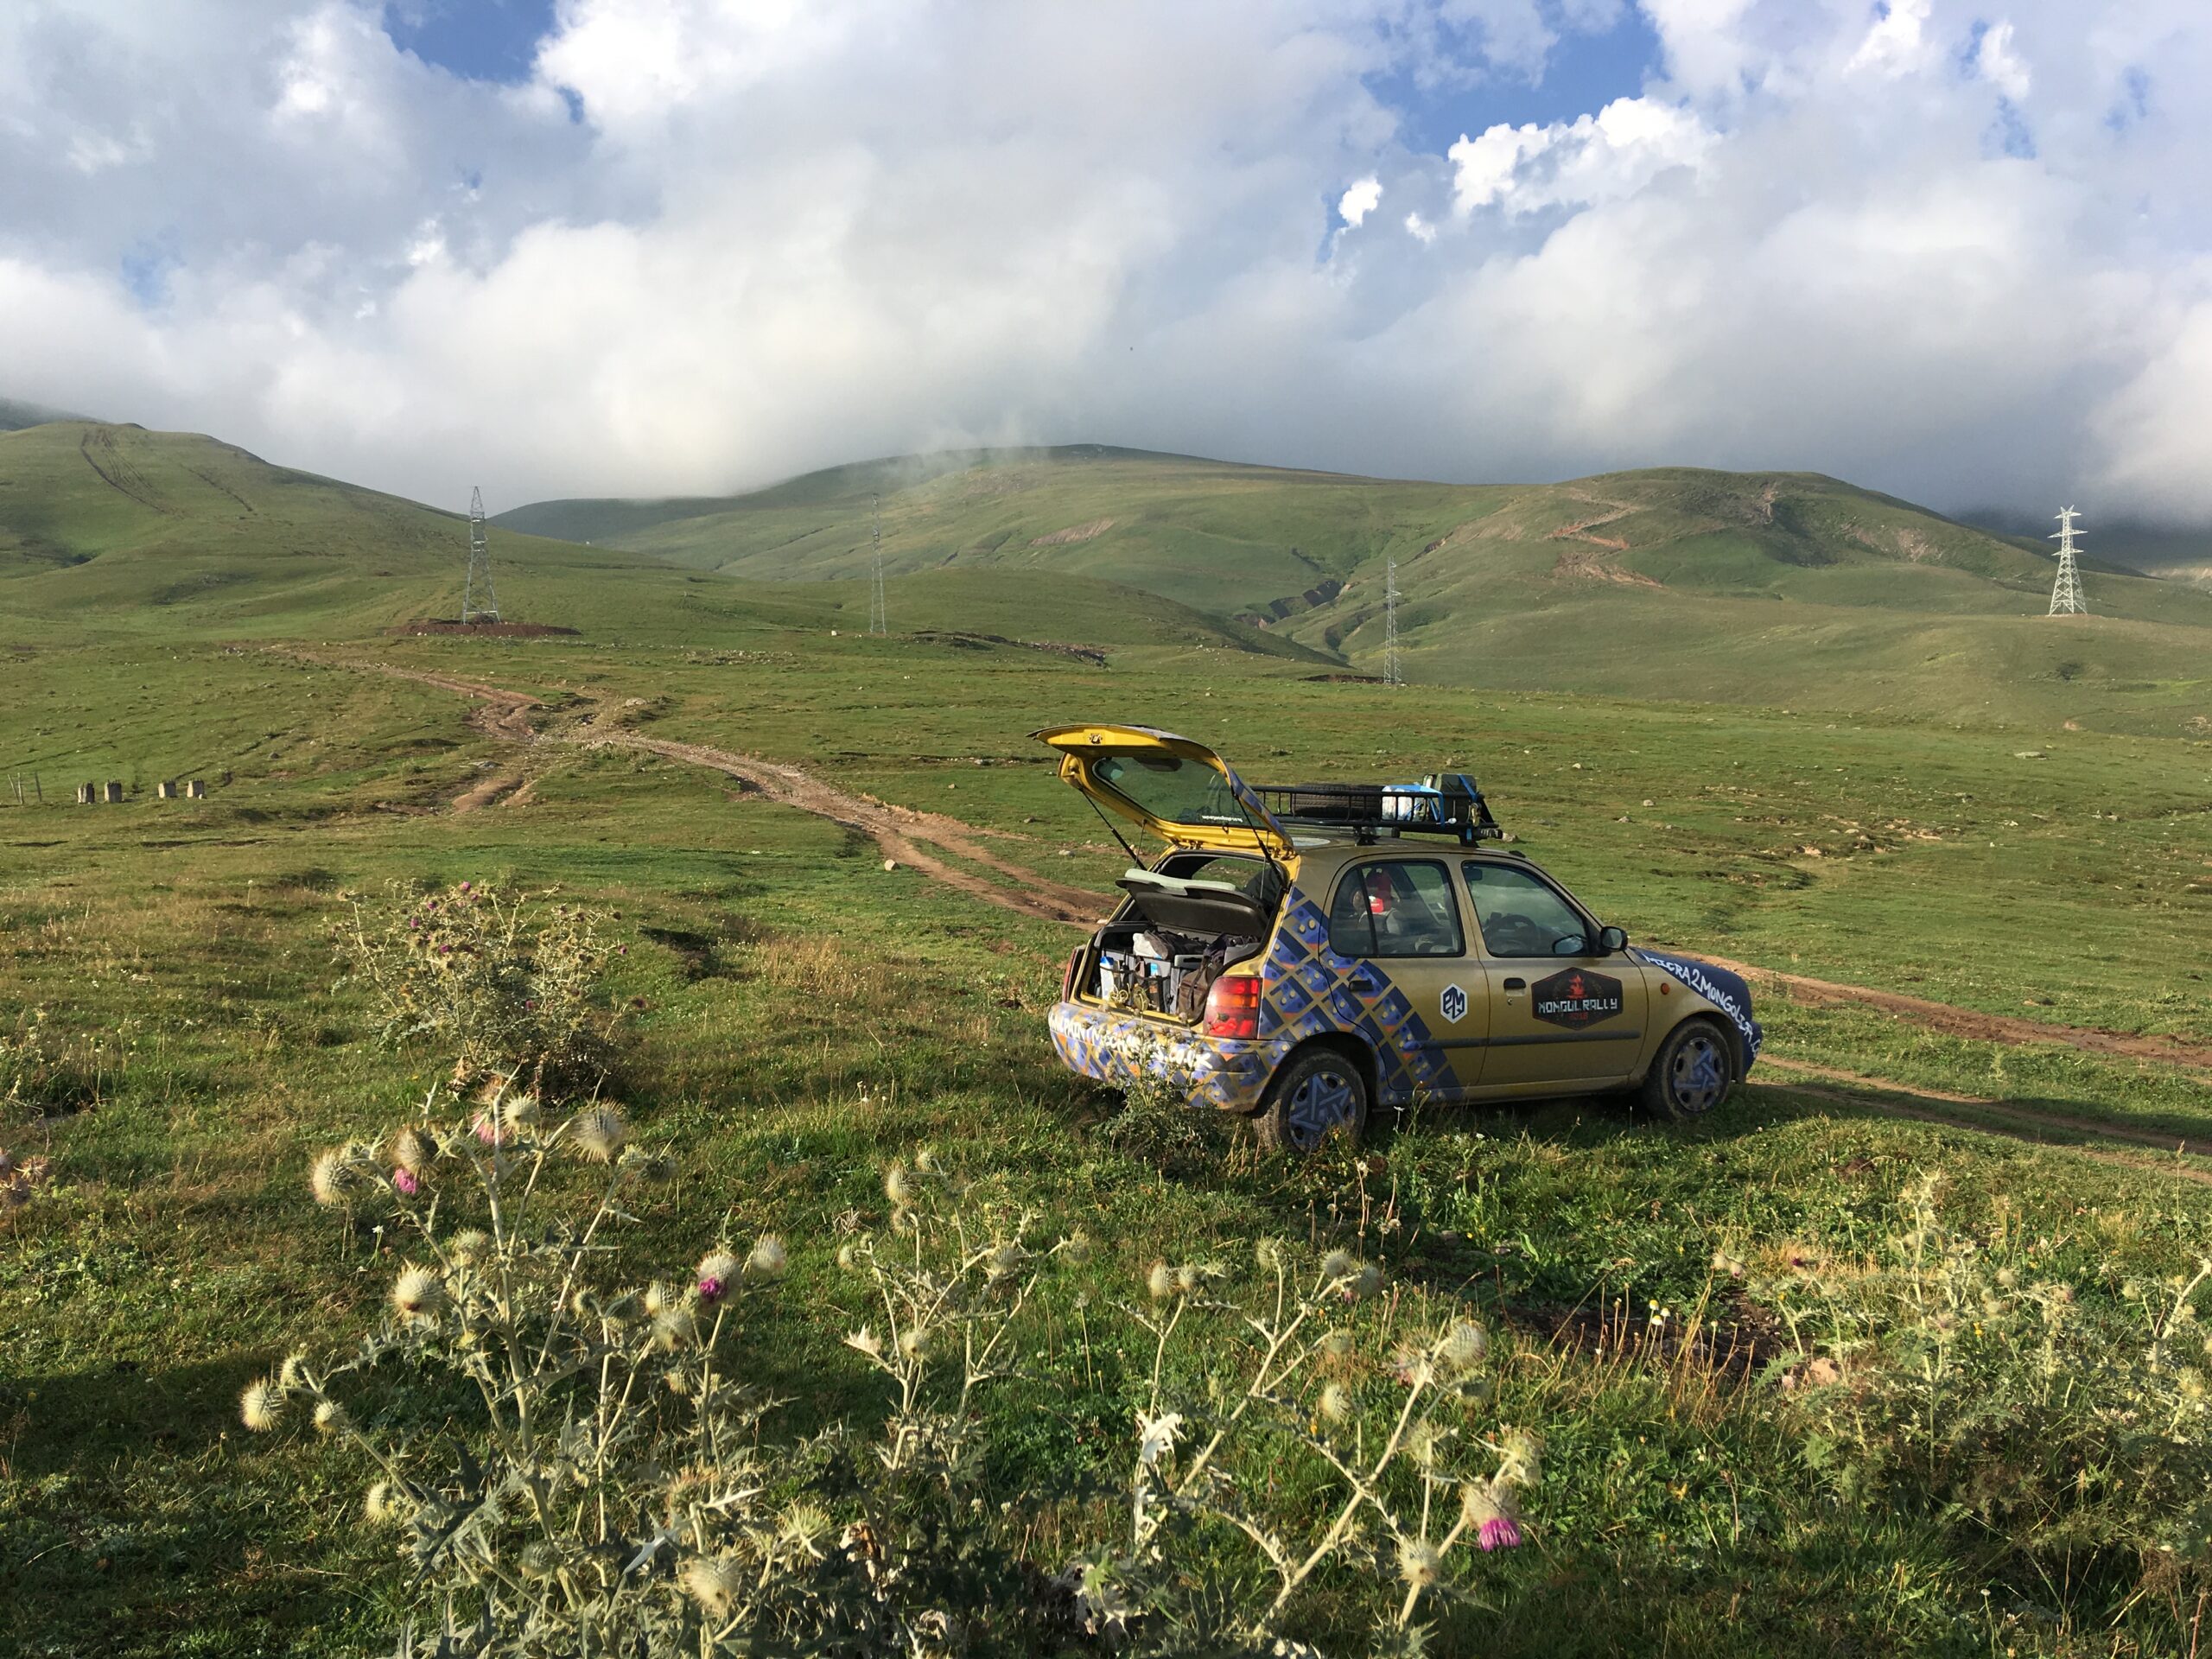 Lost in Georgia on the Mongol Rally